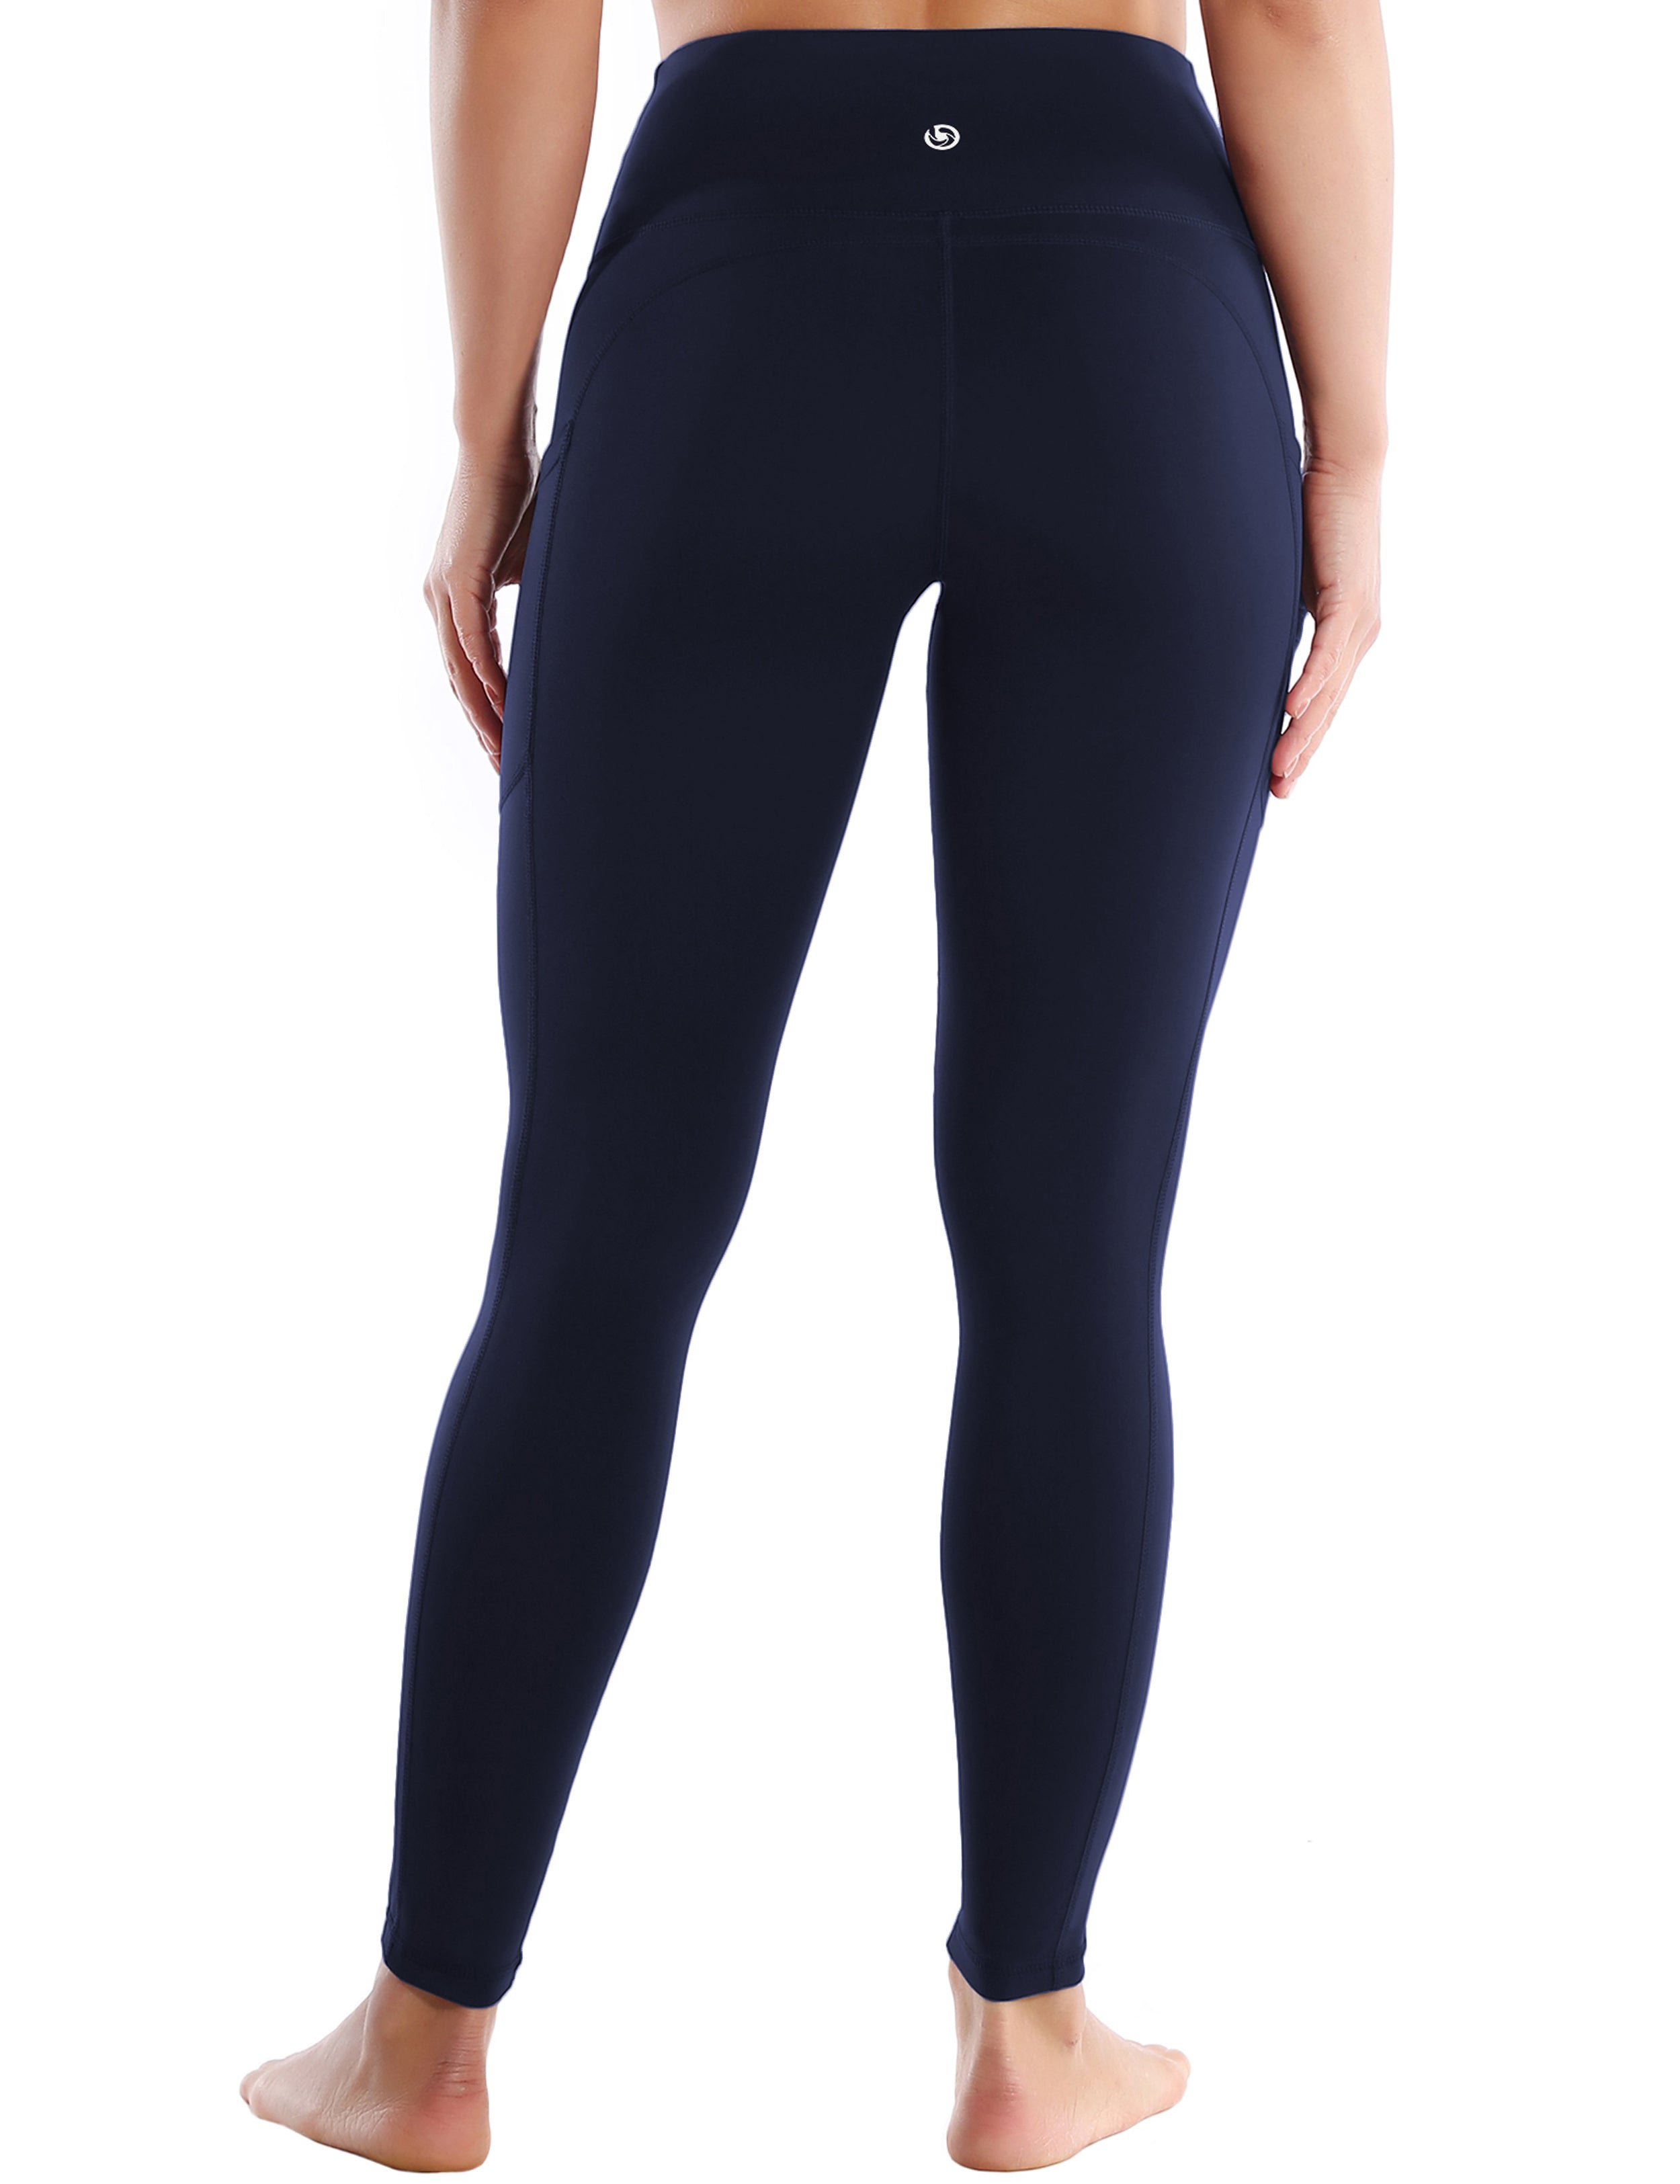 Hip Line Side Pockets Biking Pants darknavy Sexy Hip Line Side Pockets 75%Nylon/25%Spandex Fabric doesn't attract lint easily 4-way stretch No see-through Moisture-wicking Tummy control Inner pocket Two lengths